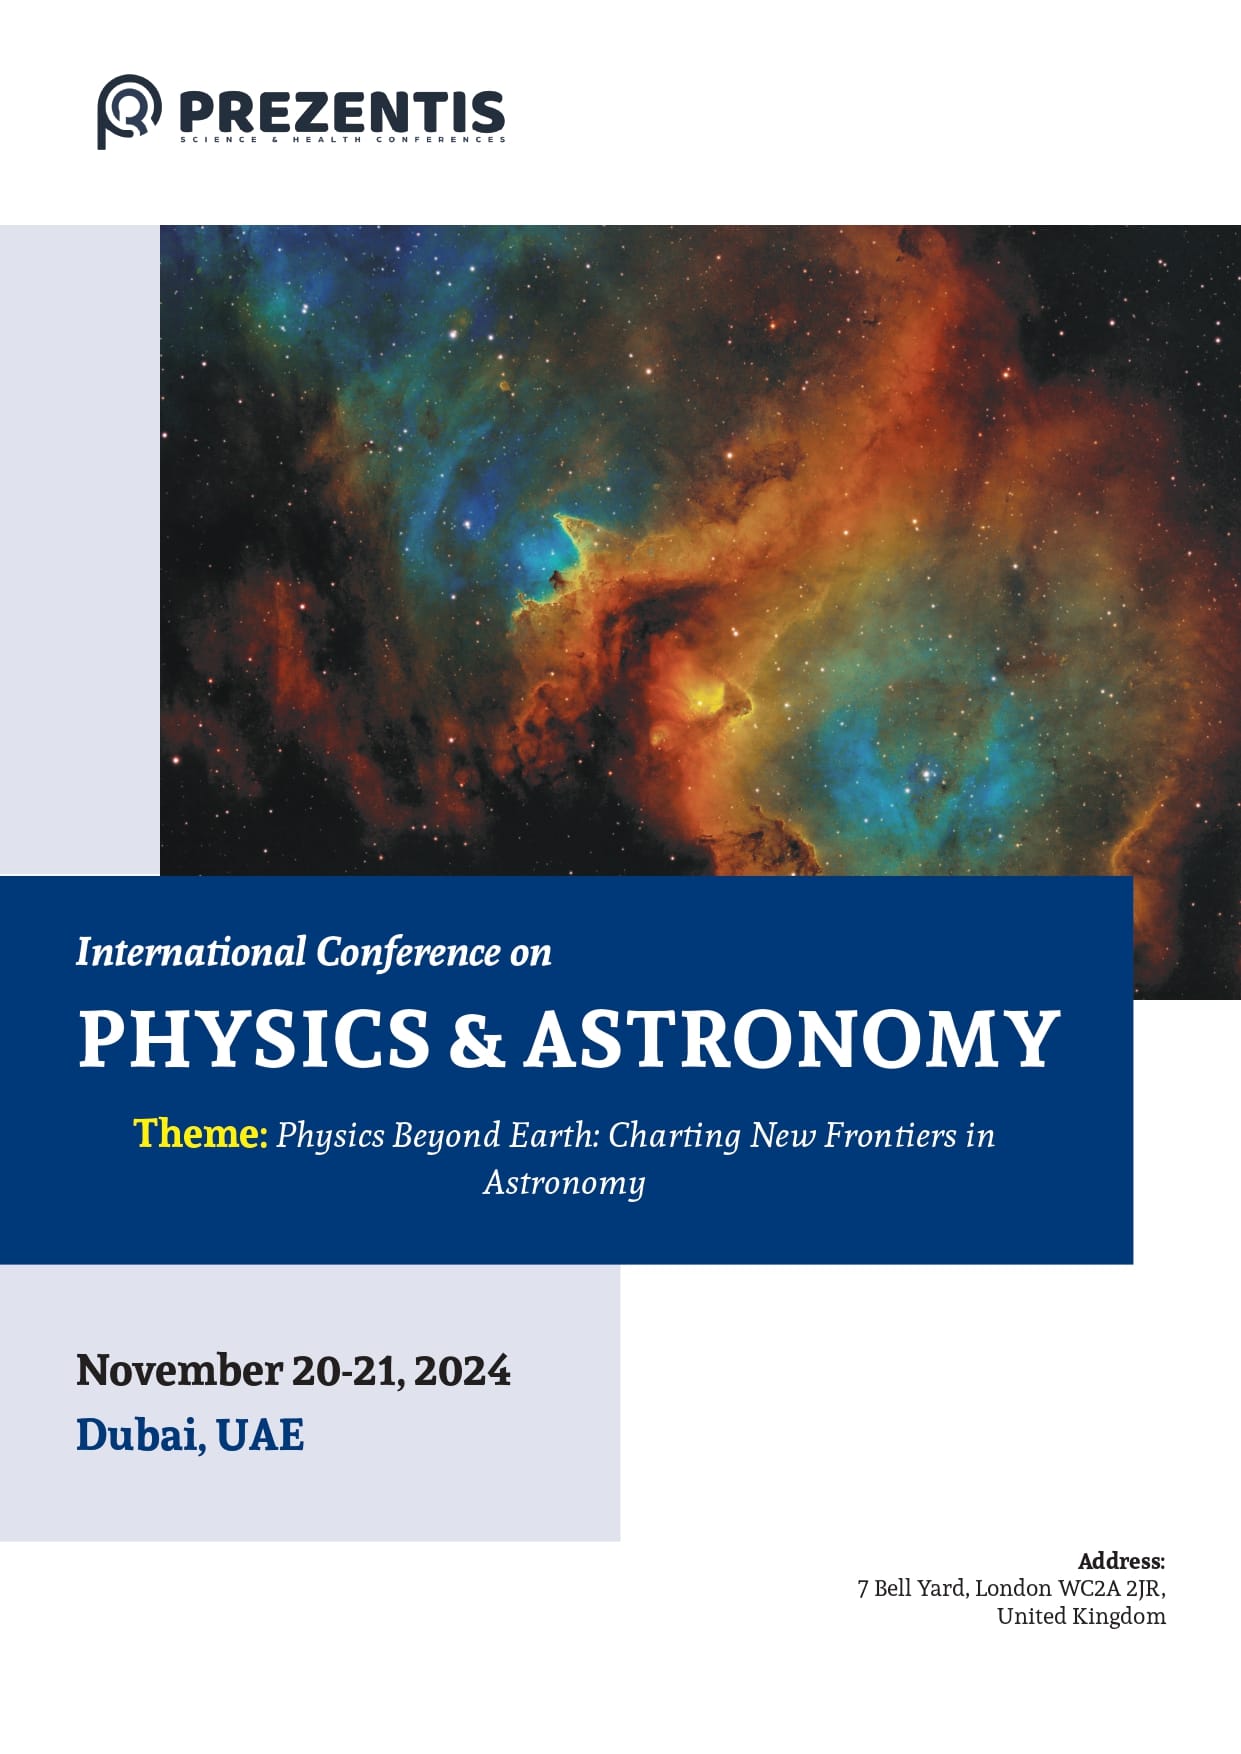 International Conference on Physics & Astronomy